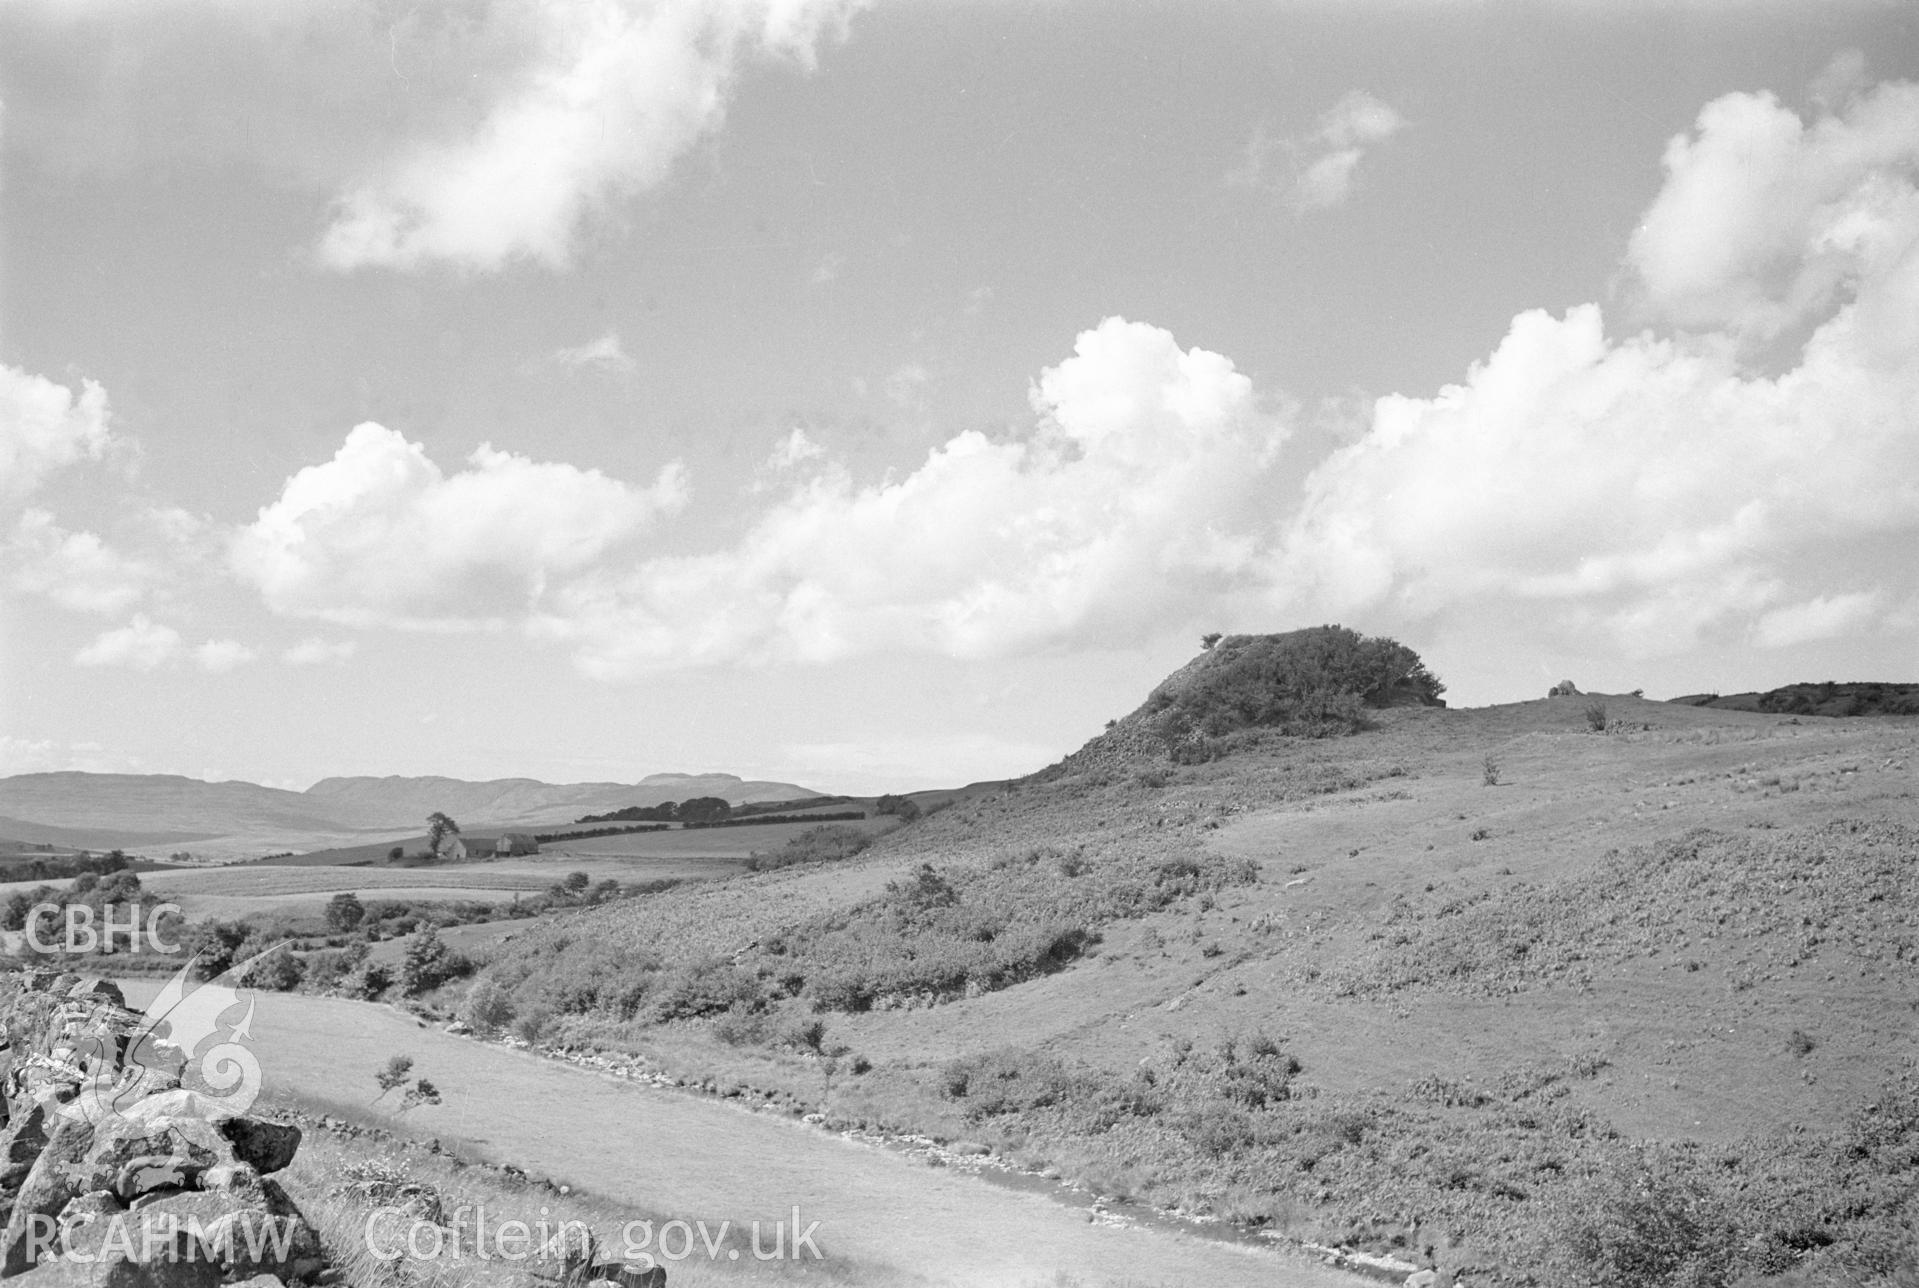 Digital copy of a nitrate negative showing view of Castell Prysor.